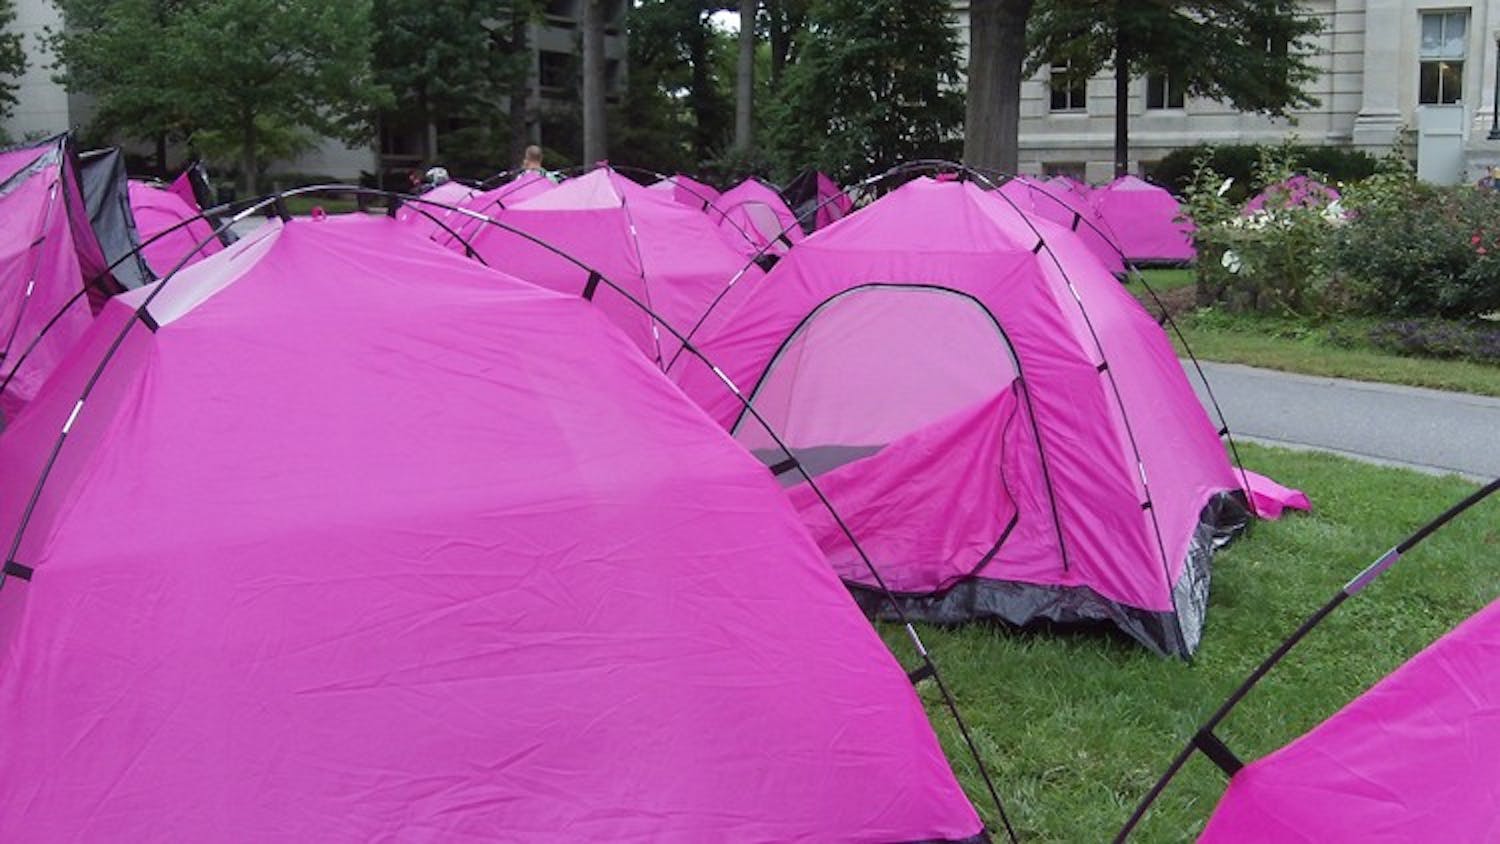 AU Cru set up 100 pink tents on the Quad to air them out before they were donated to Somali refugees in Djibouti.